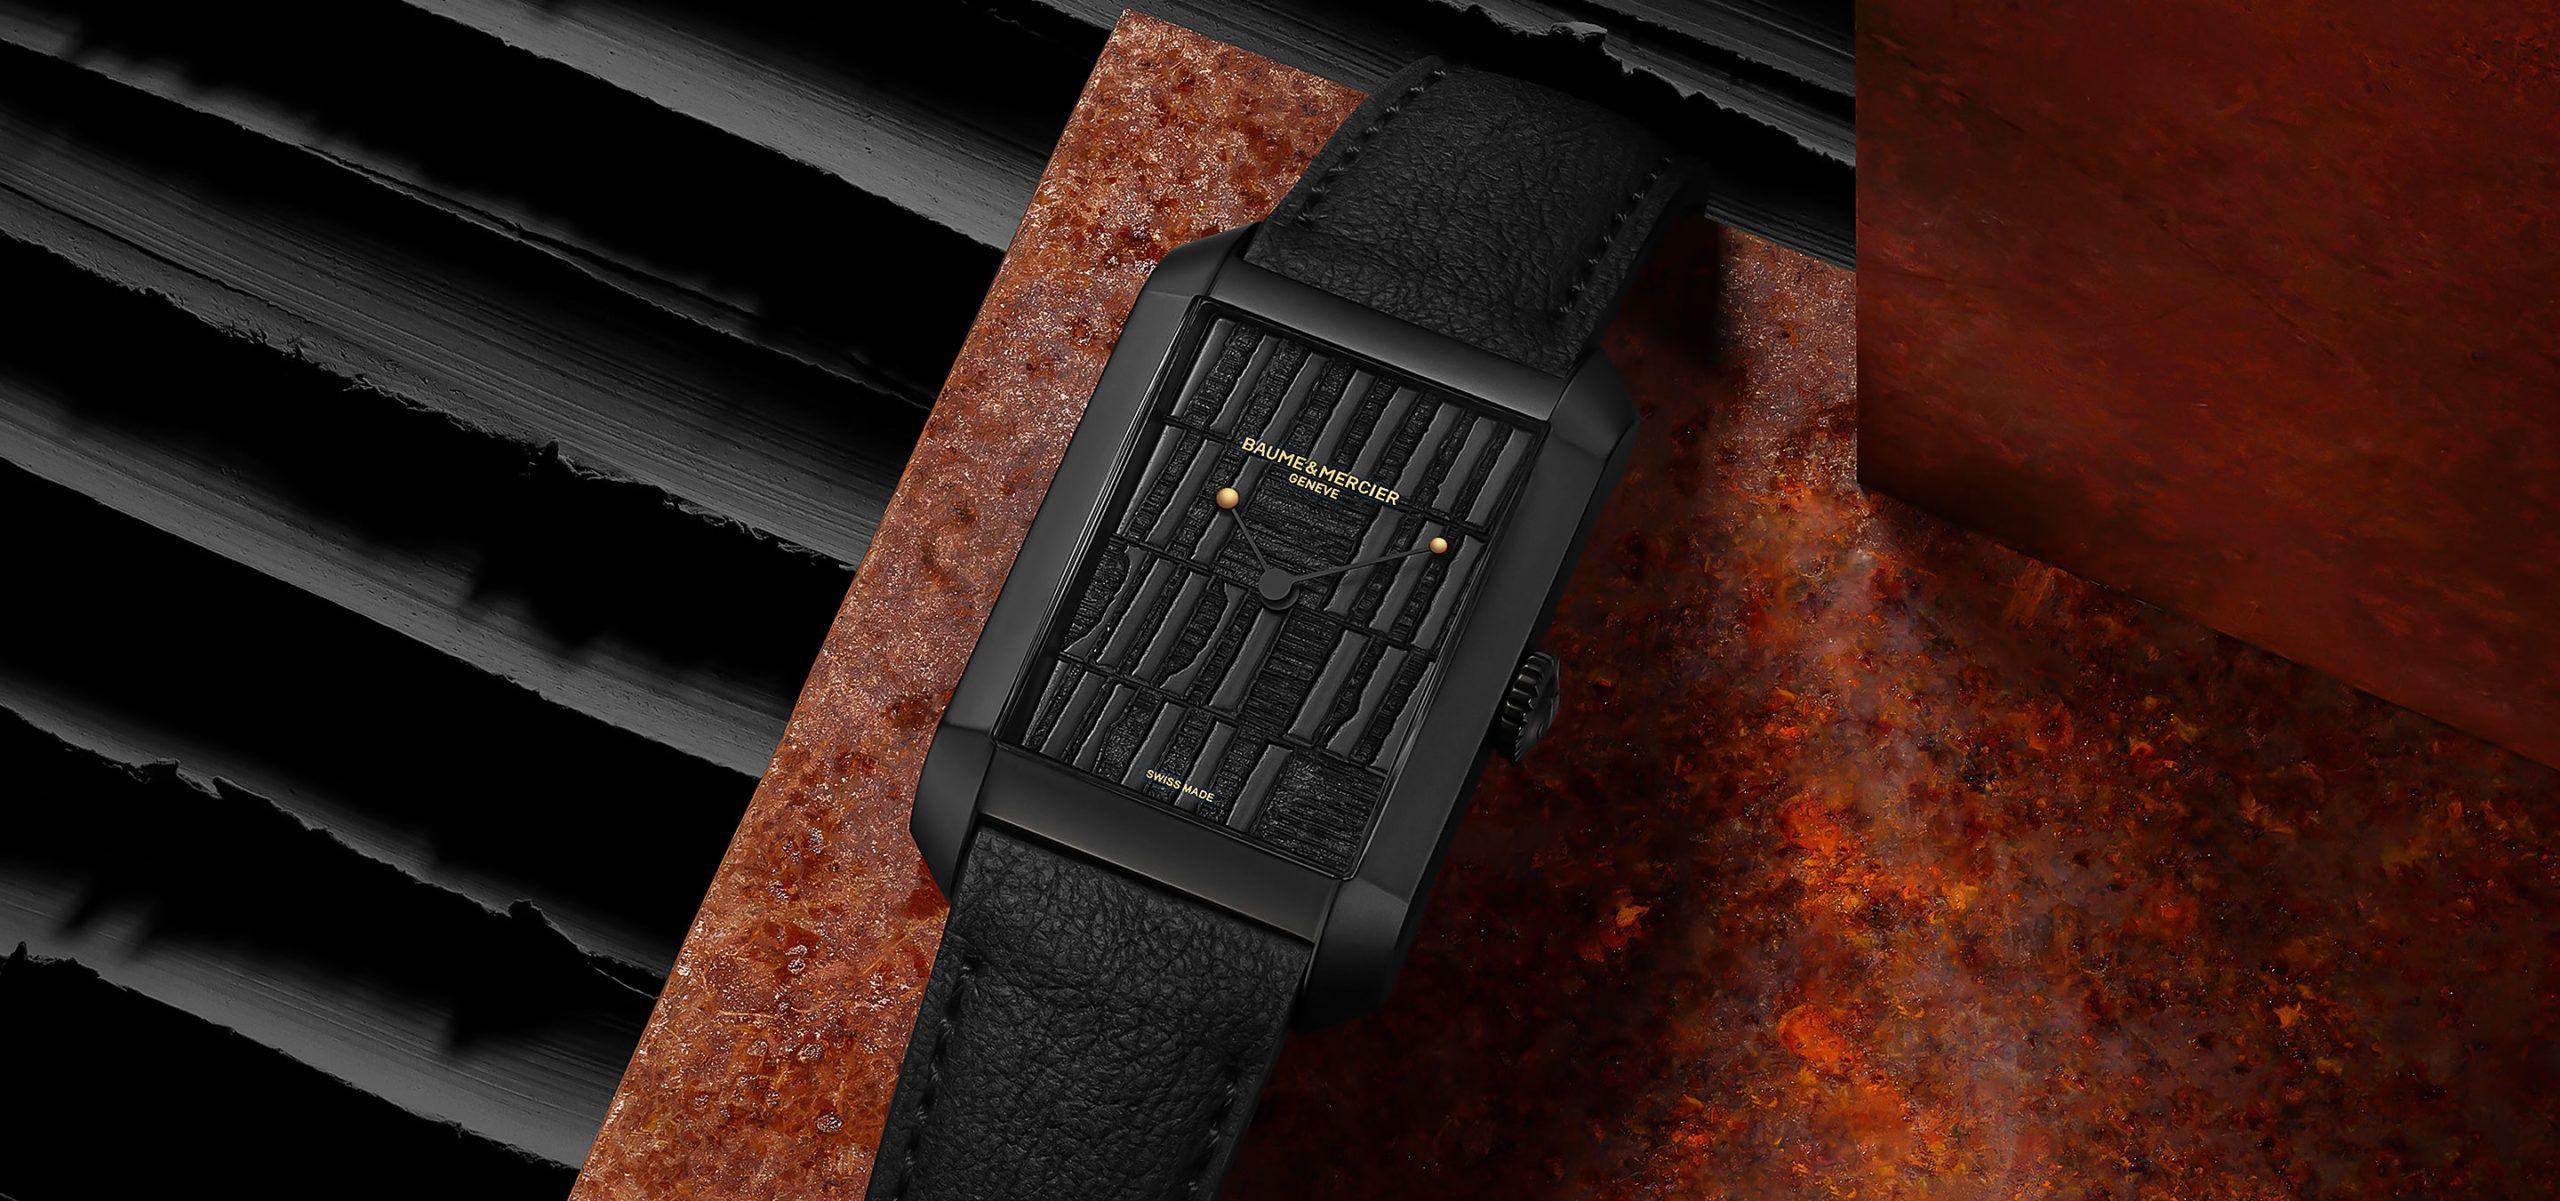 Monochromatic Marvel: The Hampton Polyptyque Edition—Musée Soulages 10th Anniversary Limited Edition Watch